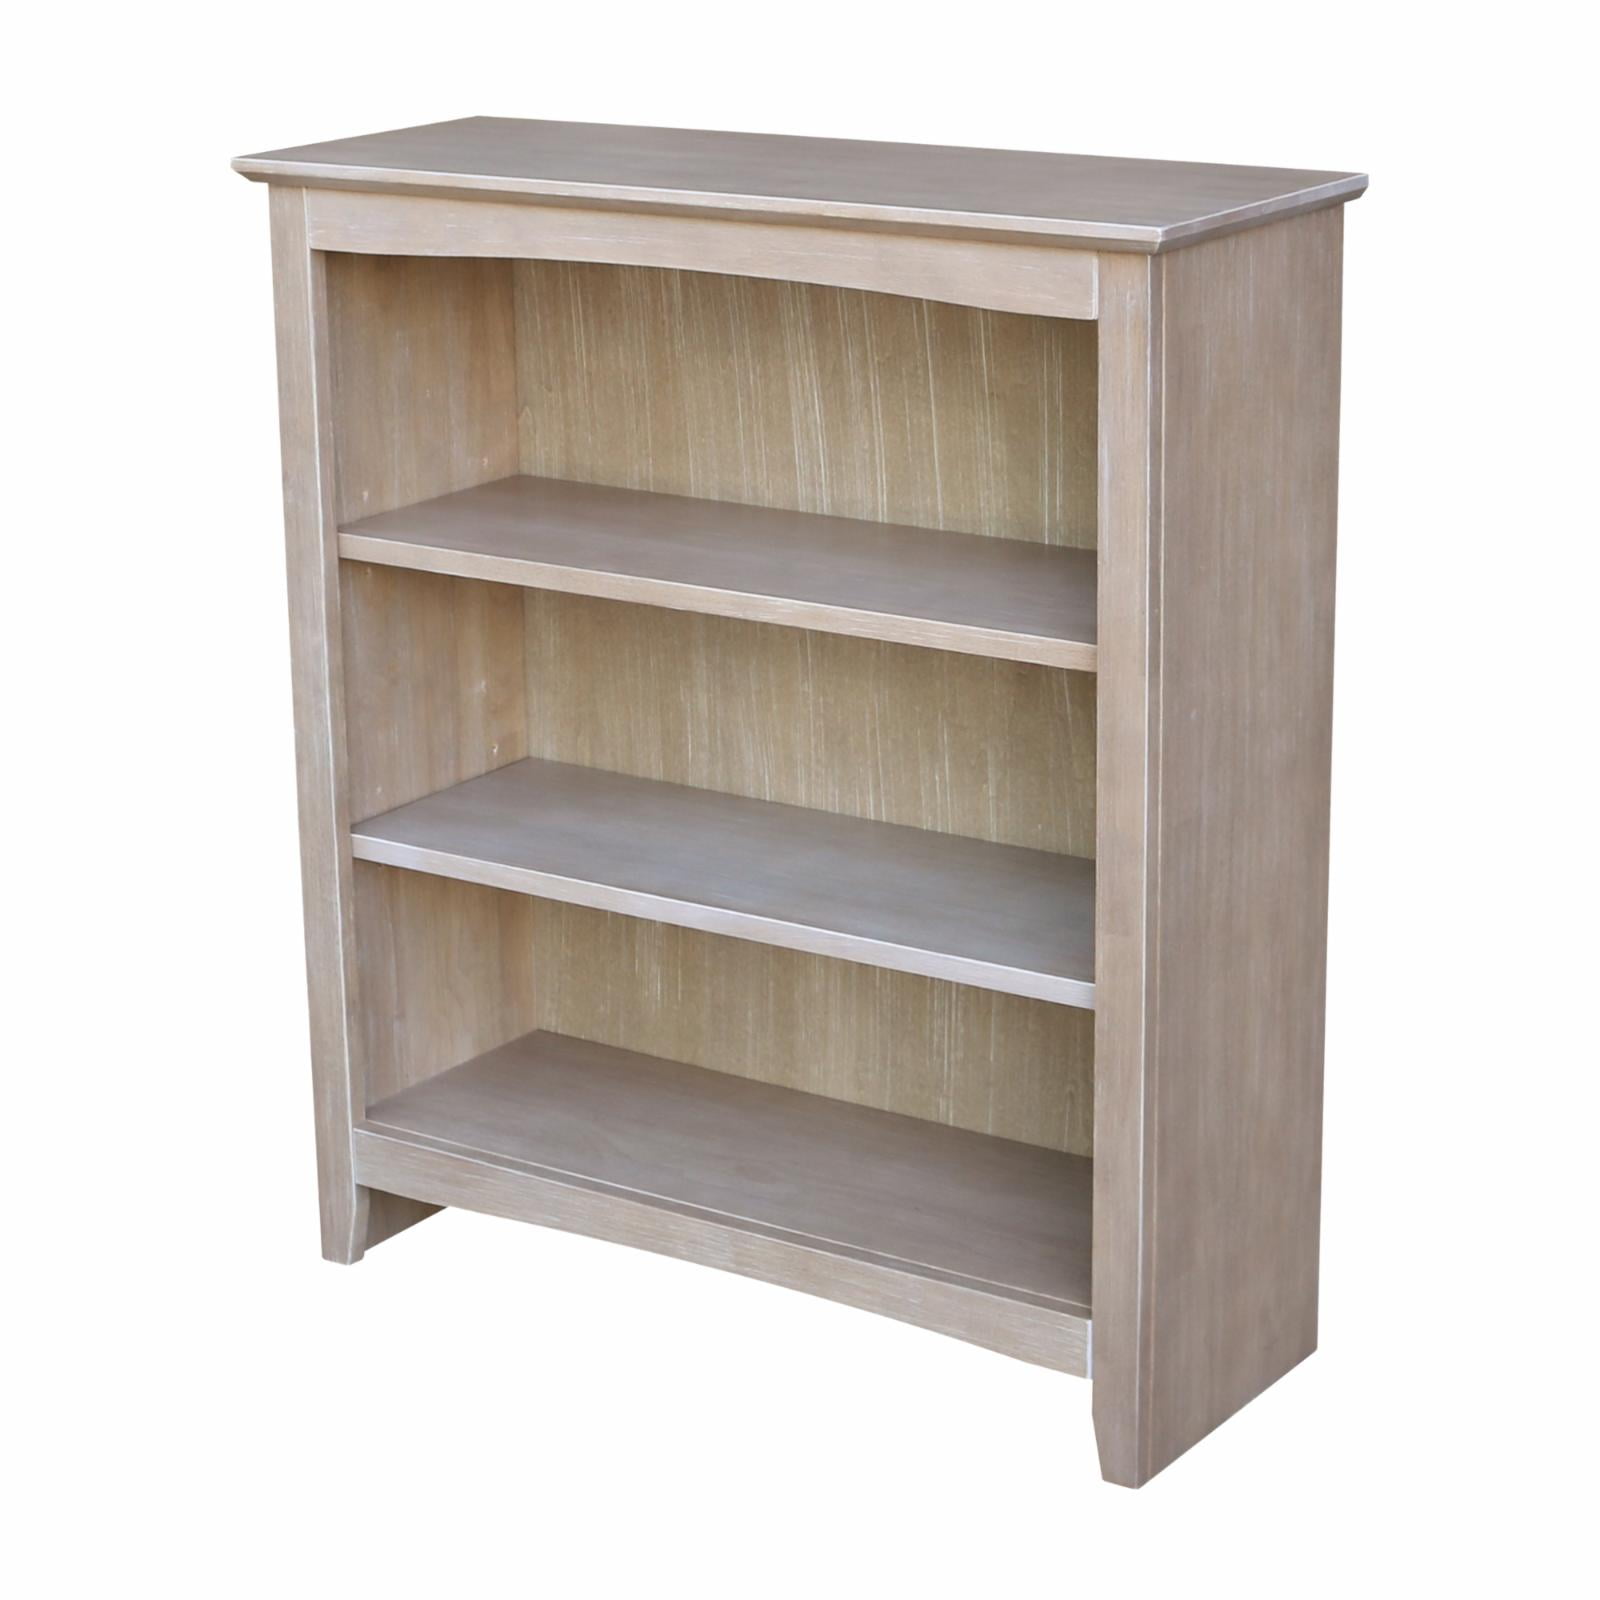 International Concepts Shaker 36 in. H x 32 in. W Bookcase - White